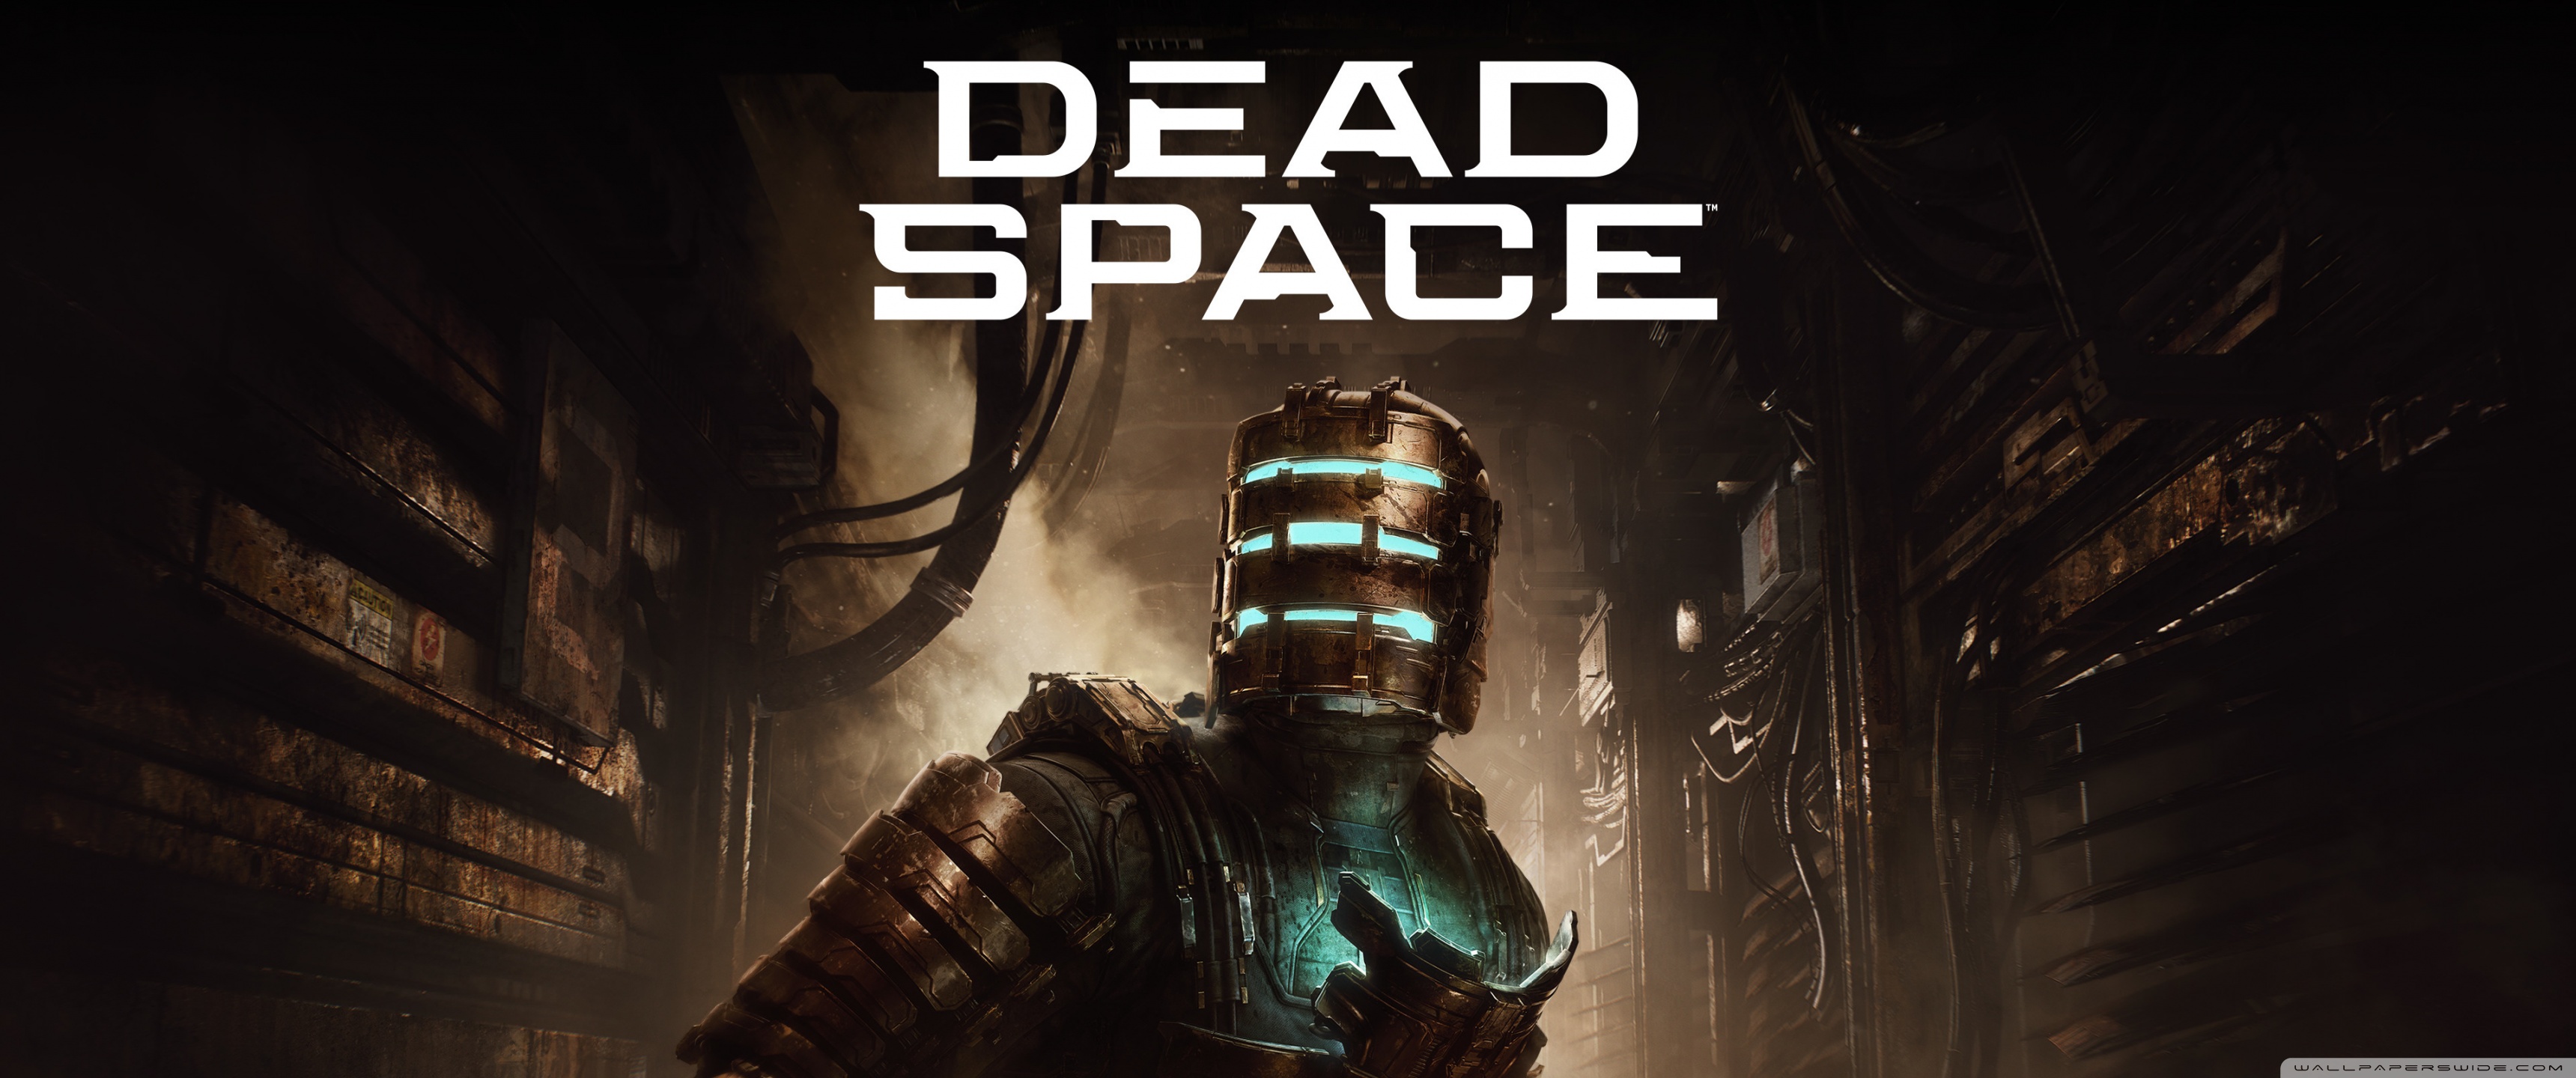 Игры 2023 года на ПК космос. Обои 3440x1440 Halo. In Space no one can hear you Scream. Dead space remake ps5